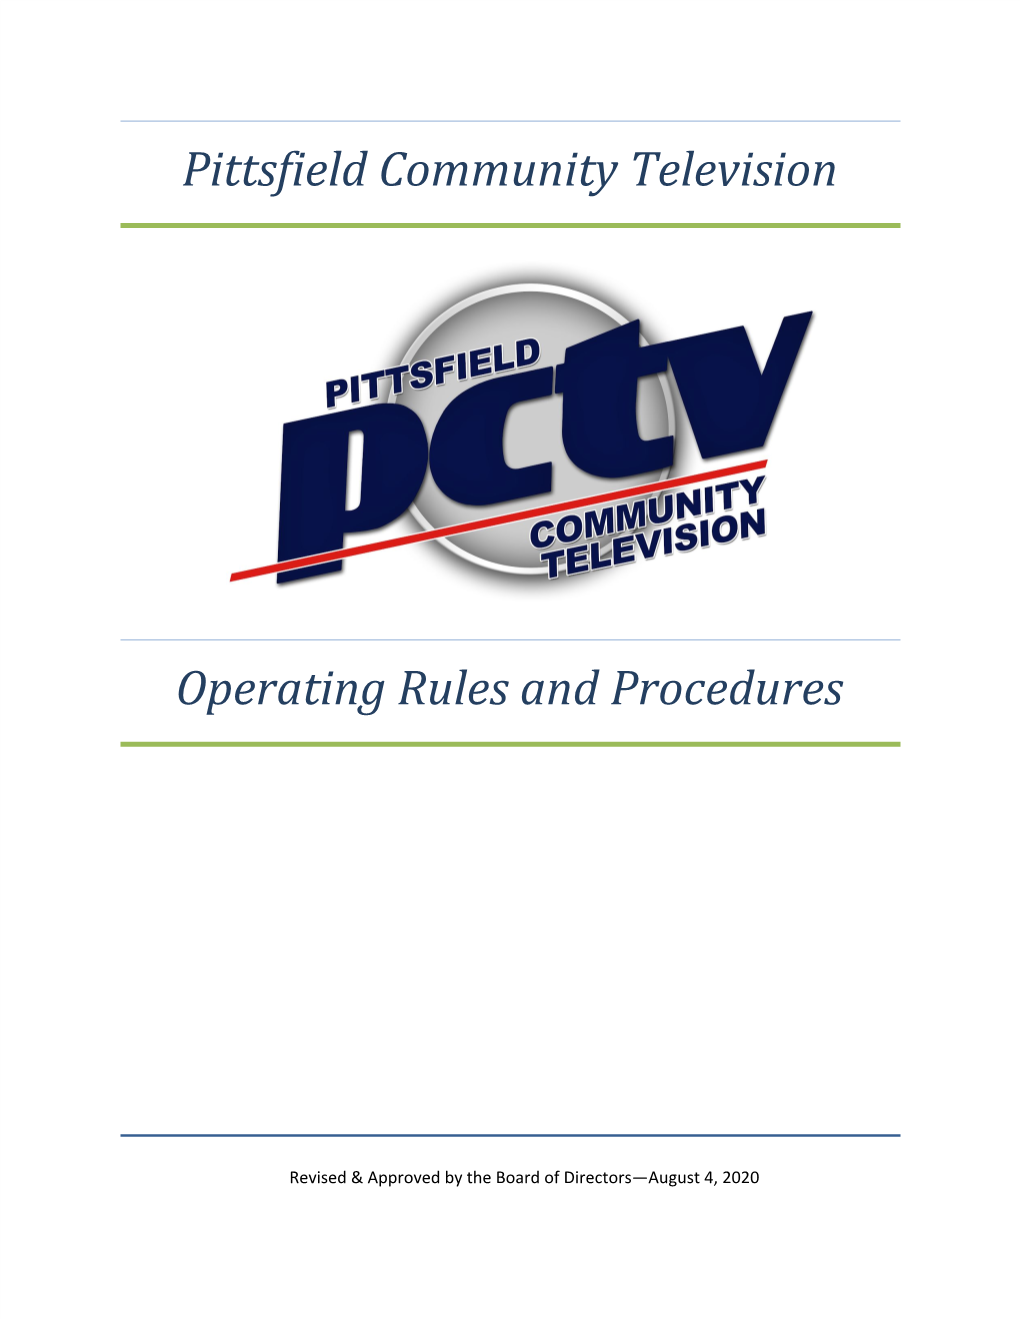 Pittsfield Community Television Operating Rules and Procedures